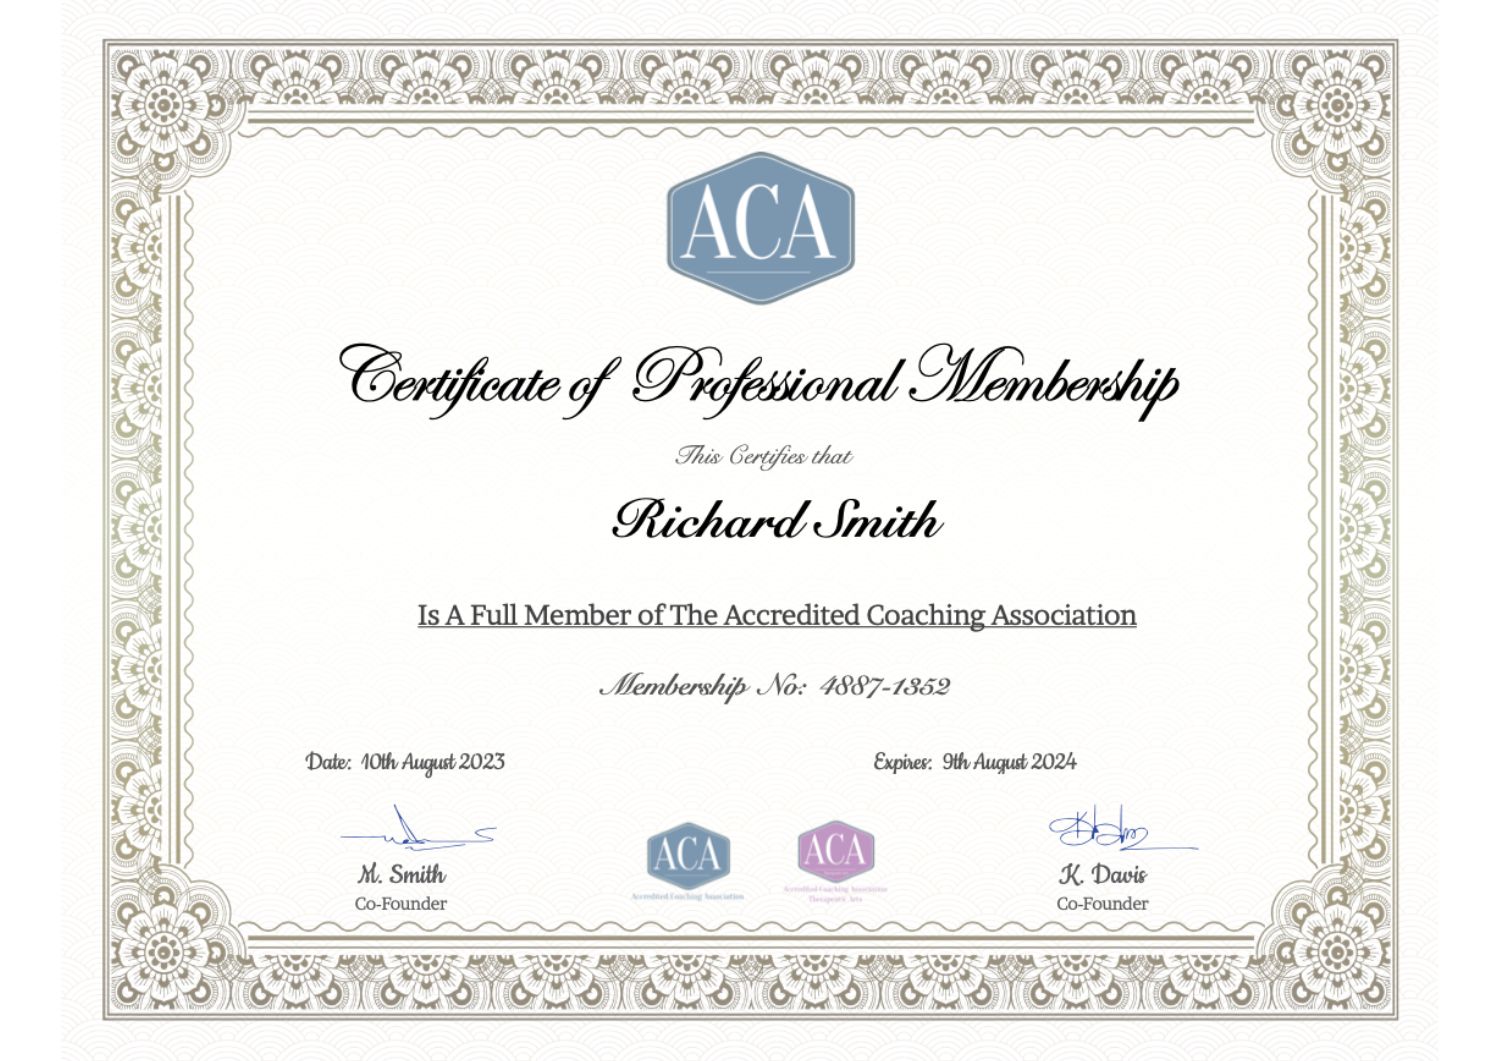 A copy of the (ACA) Accredited Coaching Association Membership Certification, the ACA logo and the ACA Therapeutic Arts logo